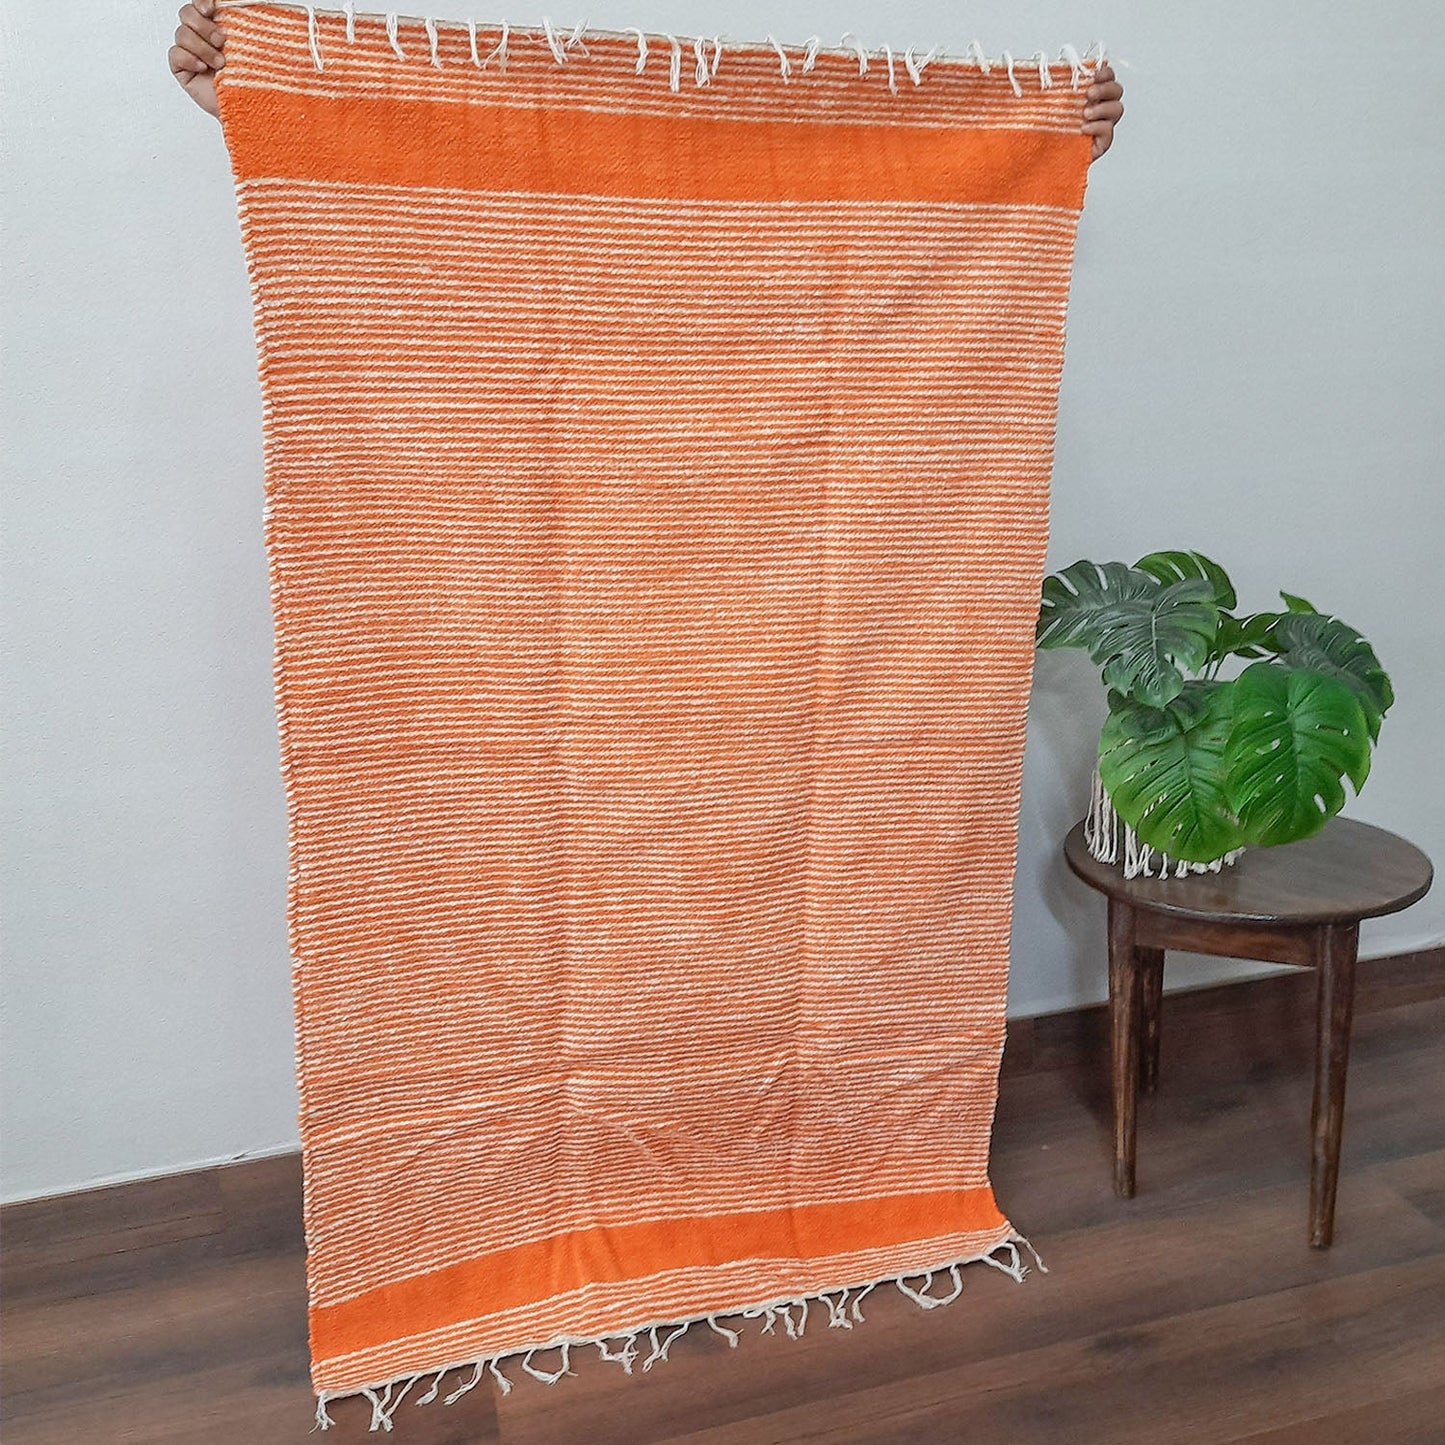 Clearance Sale-Avioni Handloom Luxe Cotton Durries in White and Orange Stripes- 90cm x 150cm (~3×5 Feet)